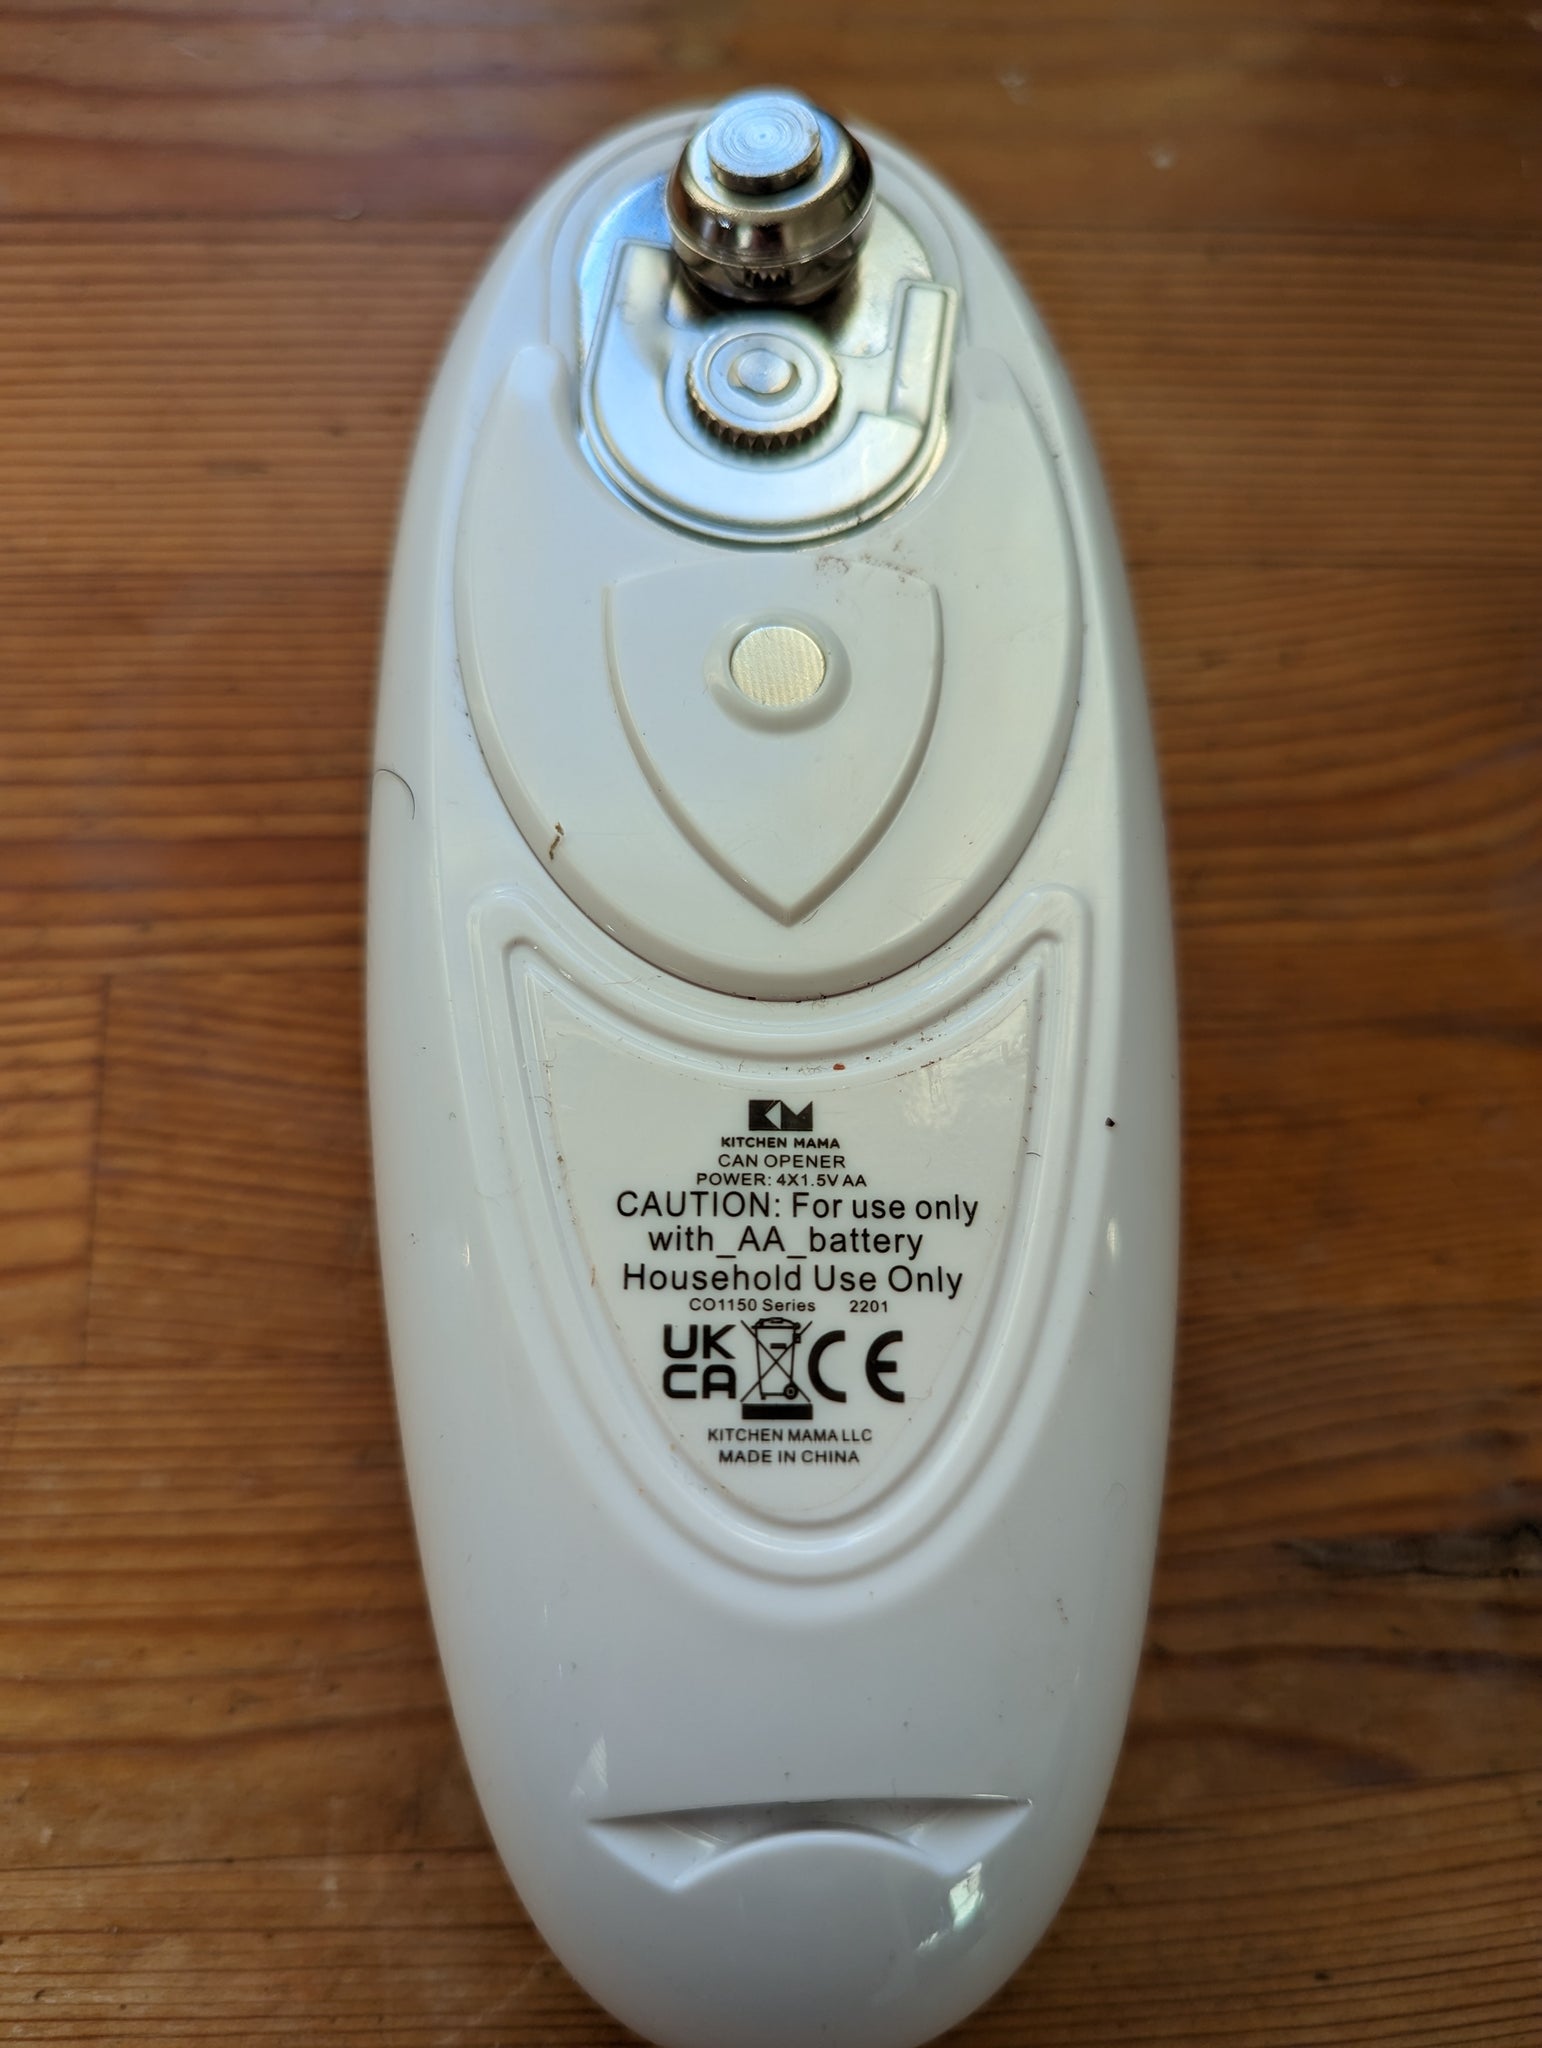 The Kitchen Mama electric can opener is on sale at